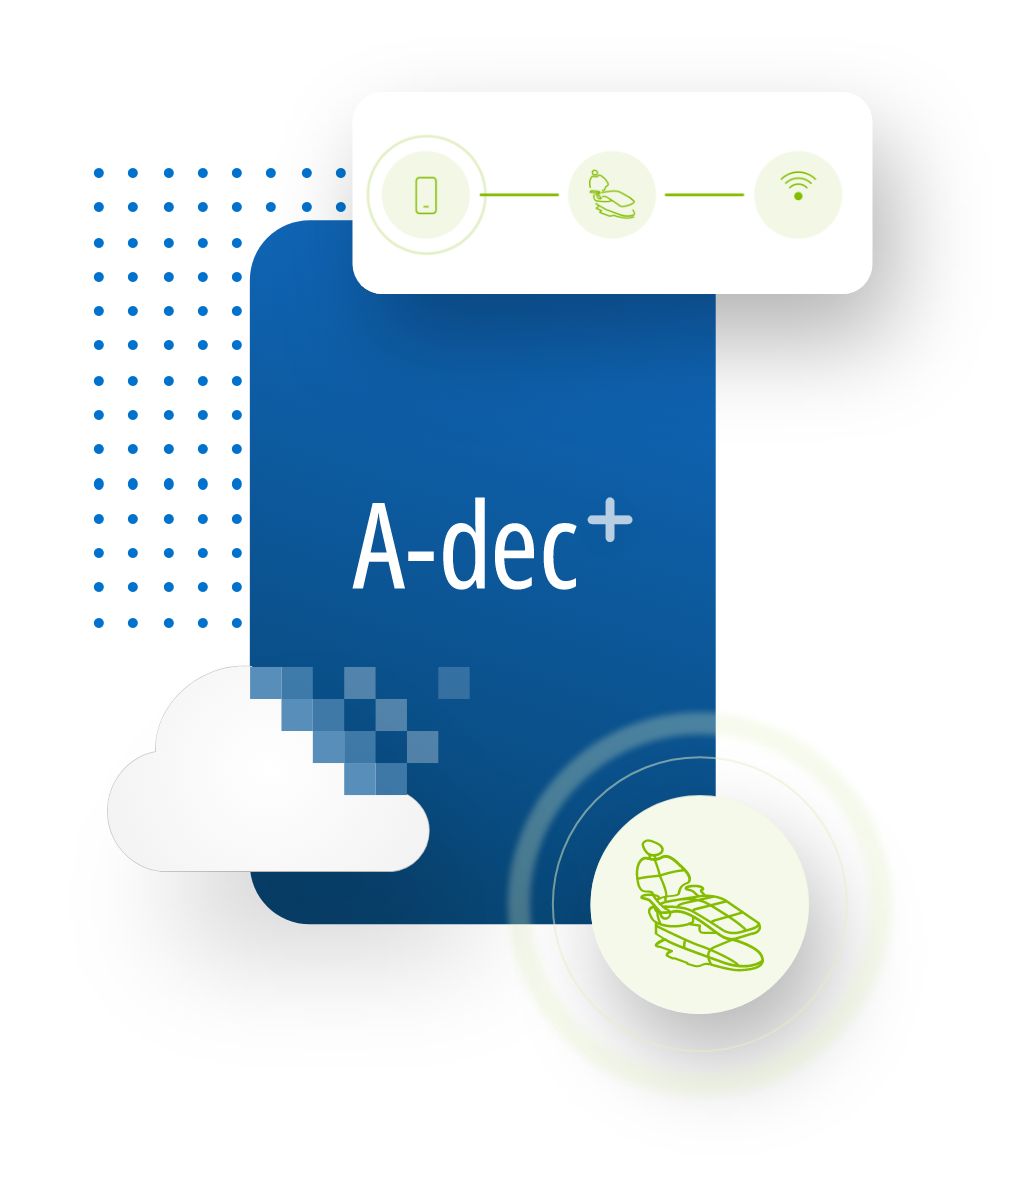 A-dec+ web and mobile application